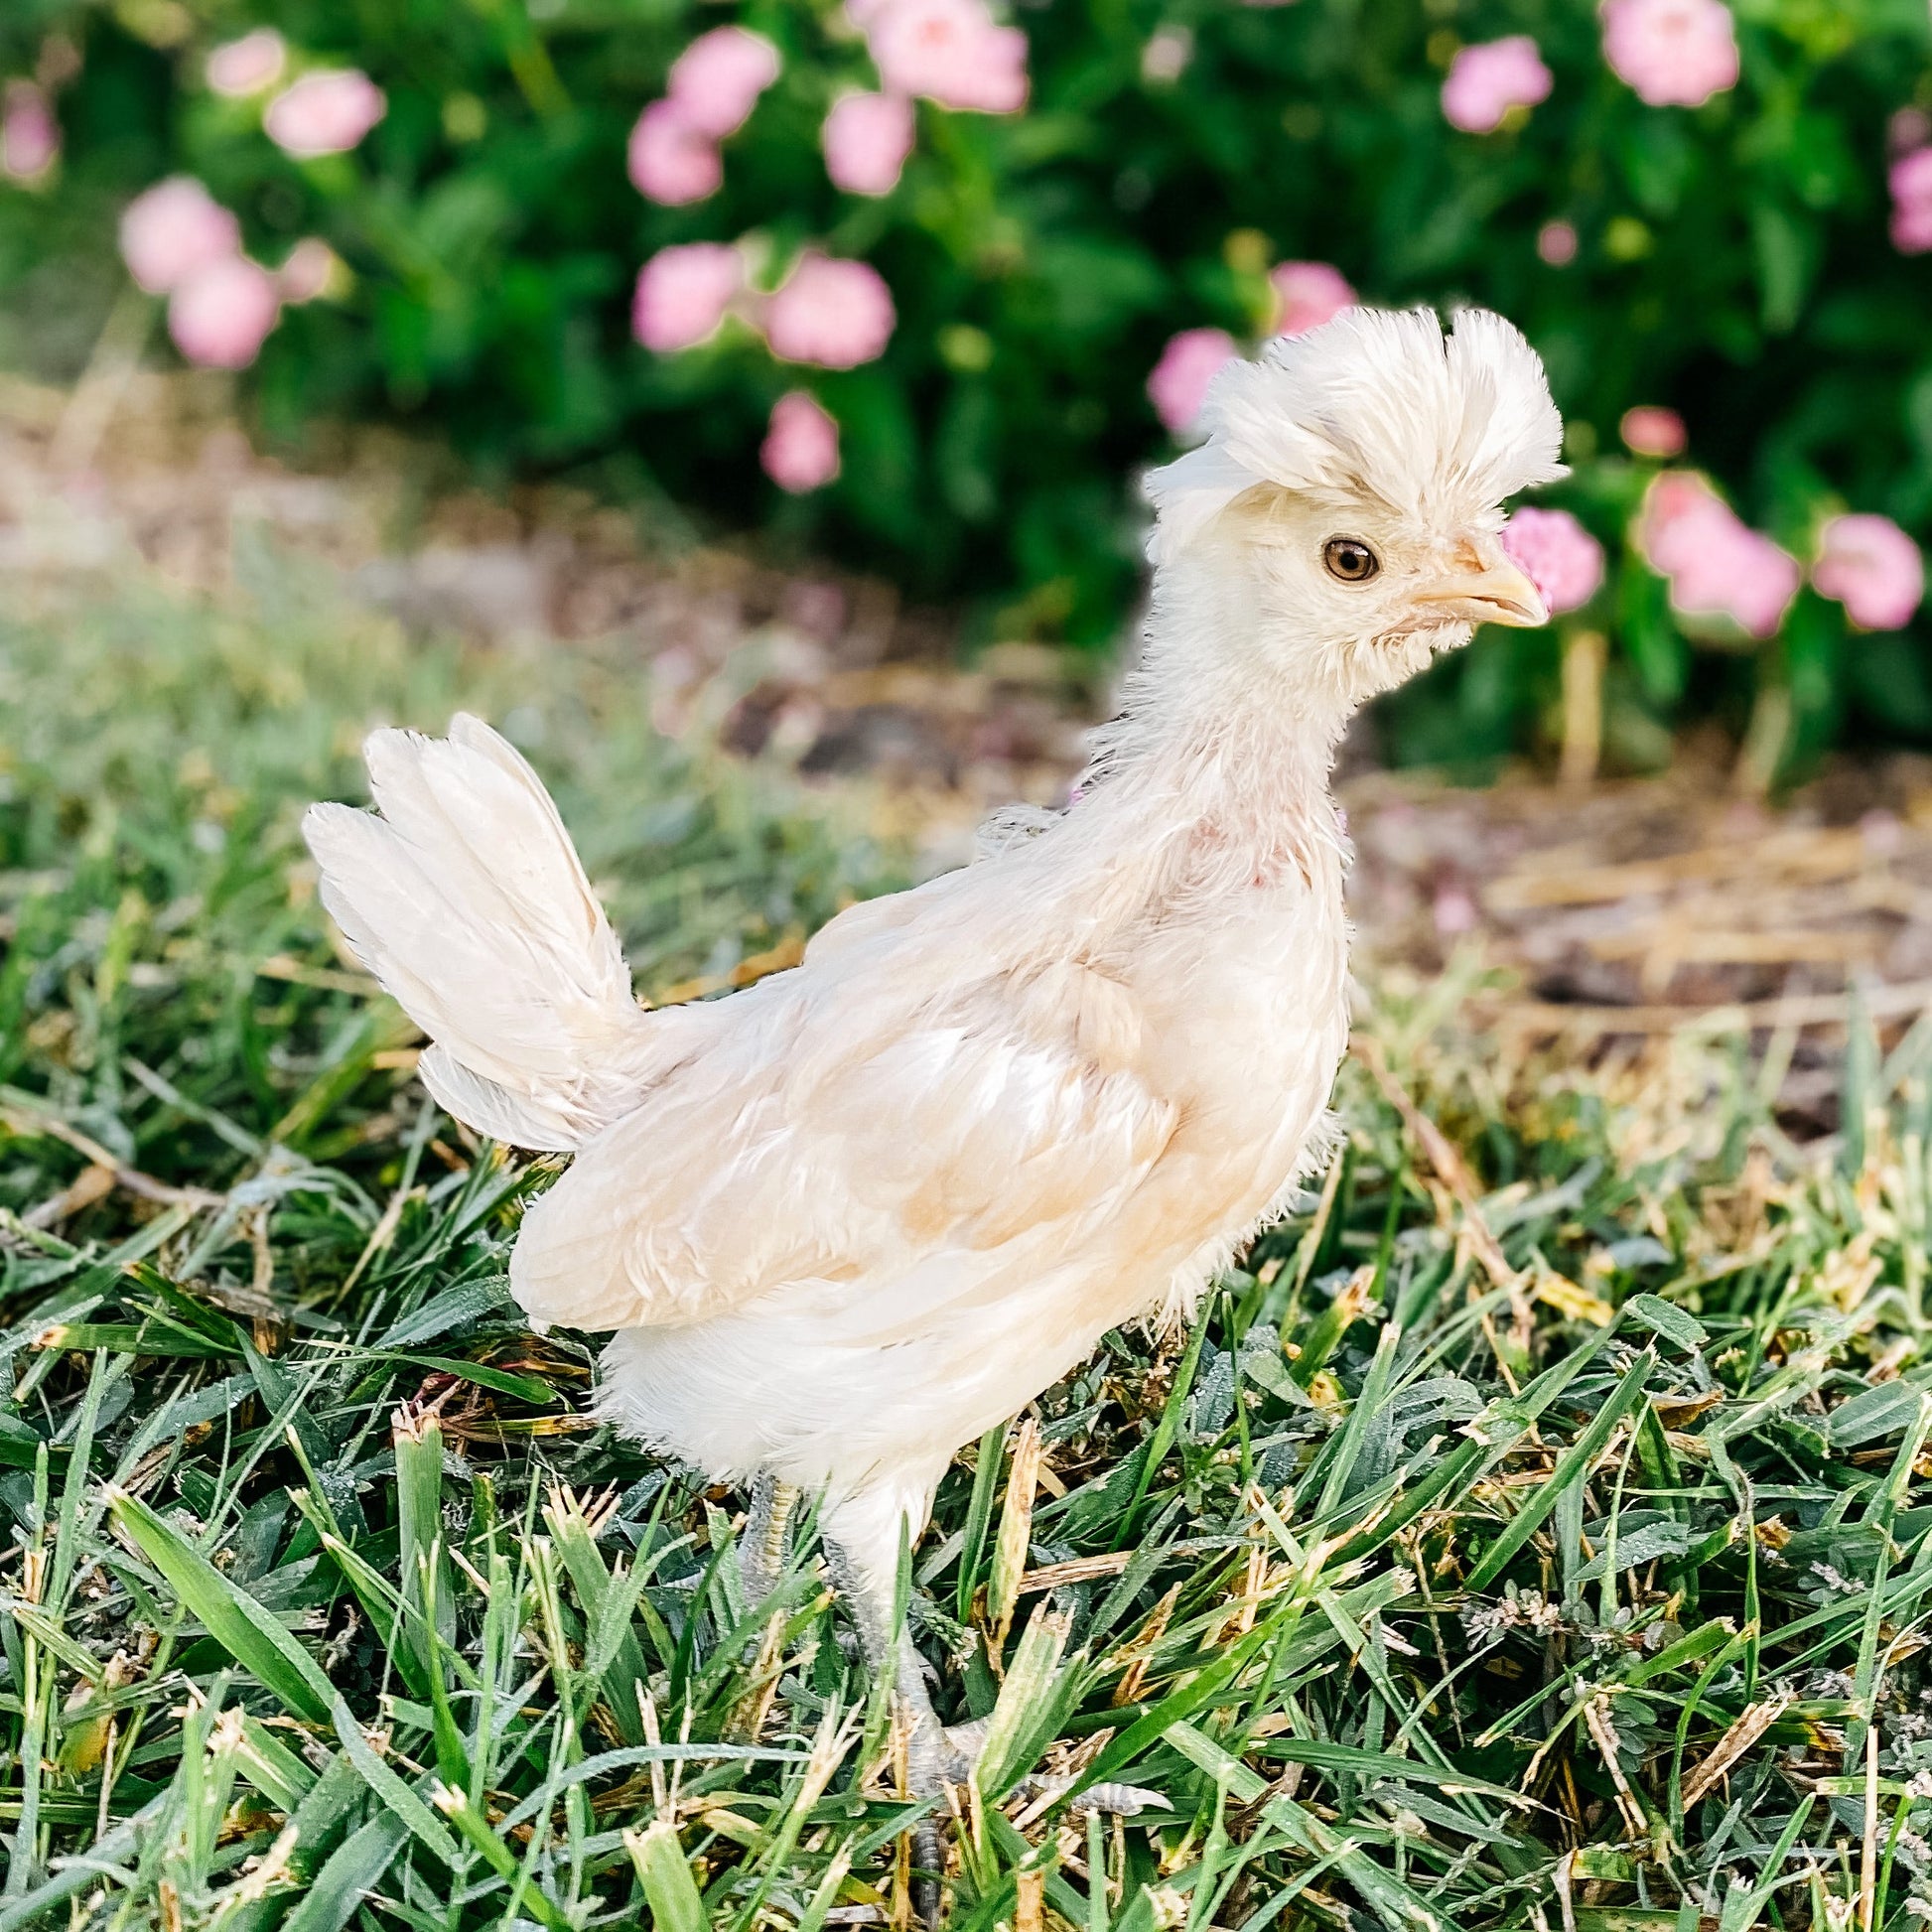 Buff Laced Polish chicken pullet